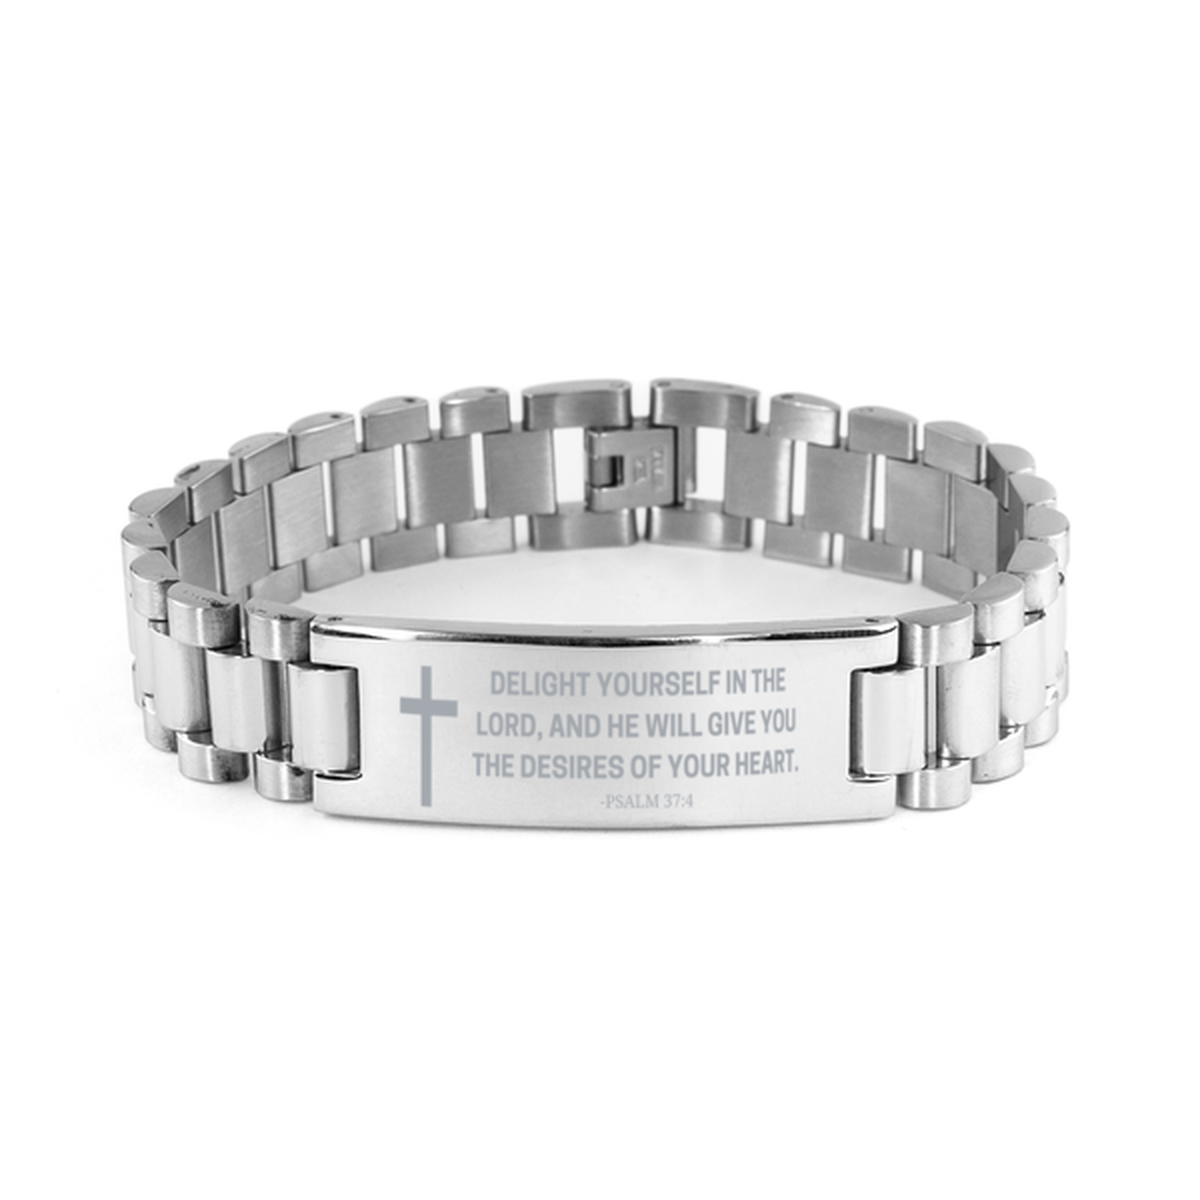 Baptism Gifts For Teenage Boys Girls, Christian Bible Verse Ladder Stainless Steel Bracelet, Delight yourself in the Lord, Catholic Confirmation Gifts for Son, Godson, Grandson, Nephew